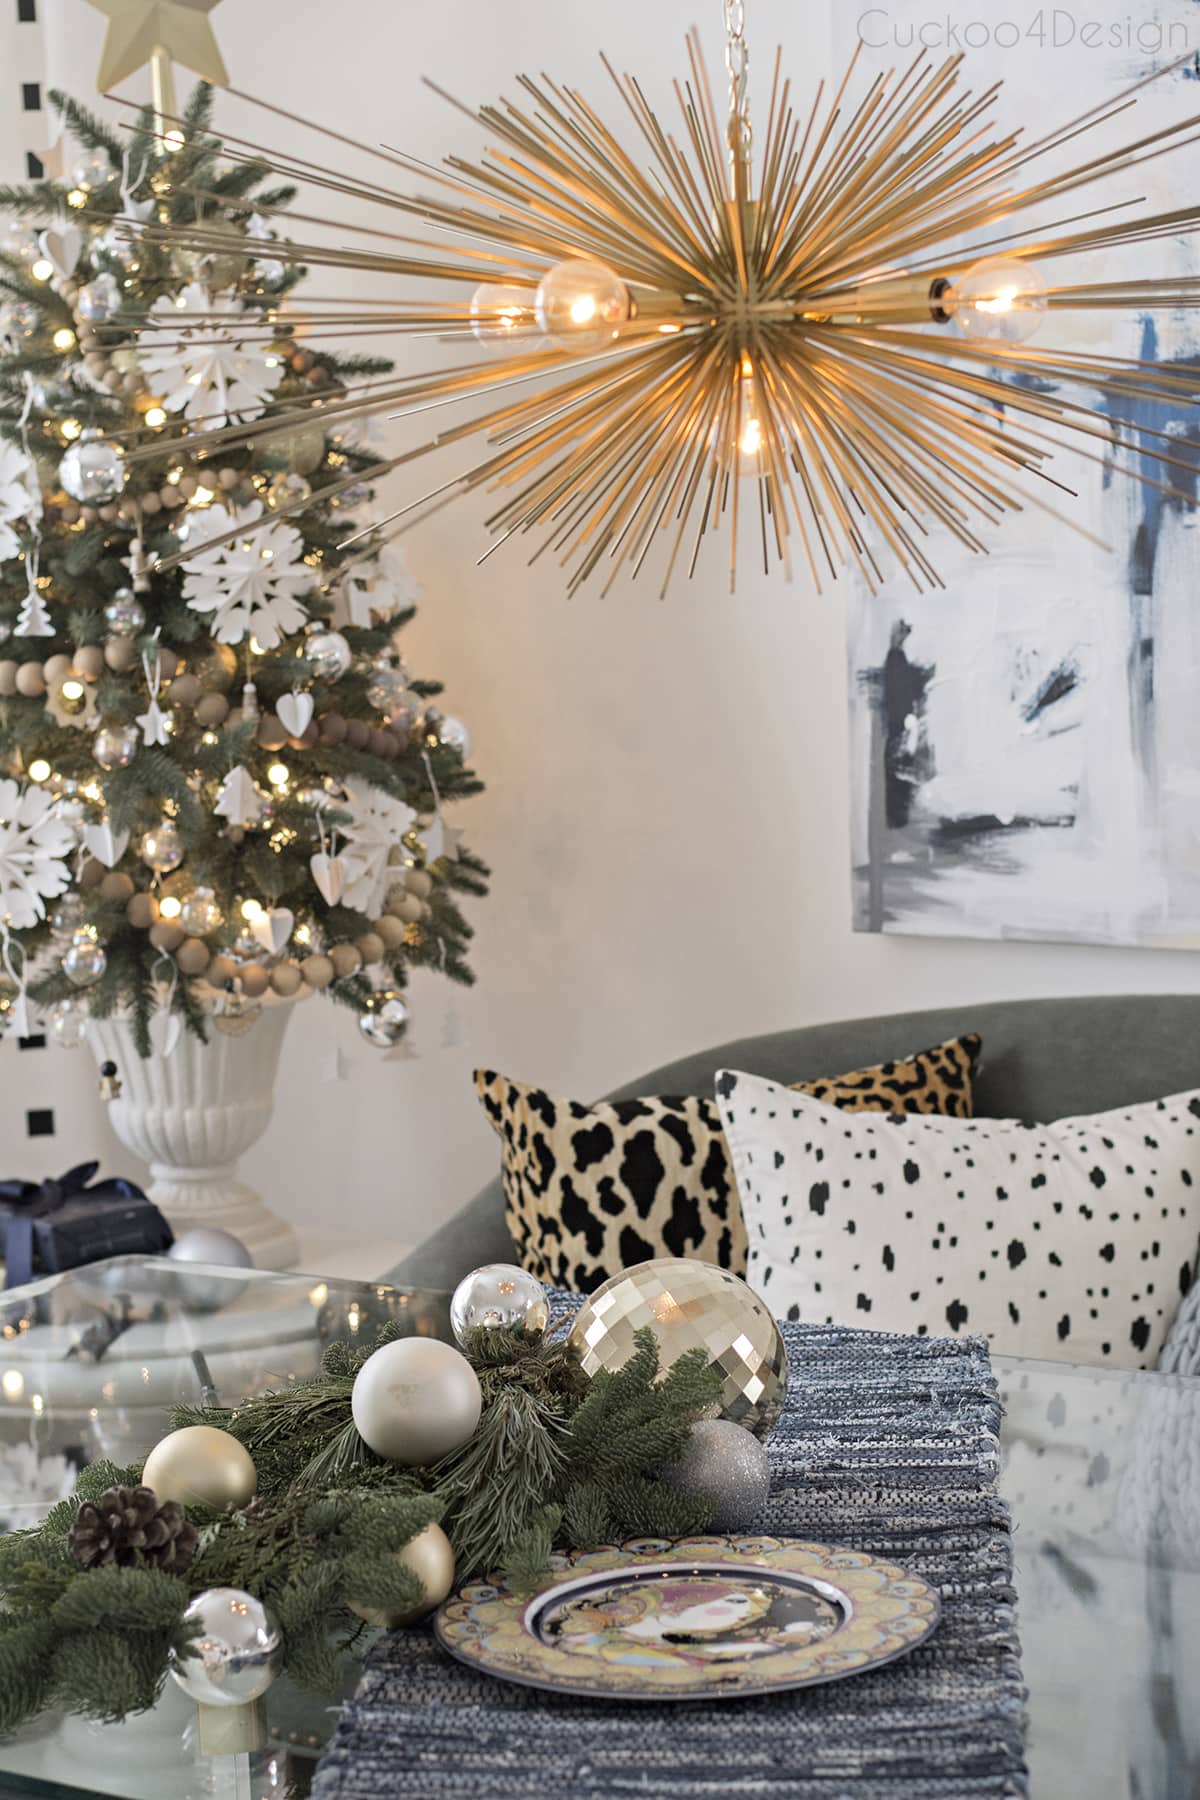 eclectic Christmas dining room with vintage glass table, urchin chandelier and abstract art